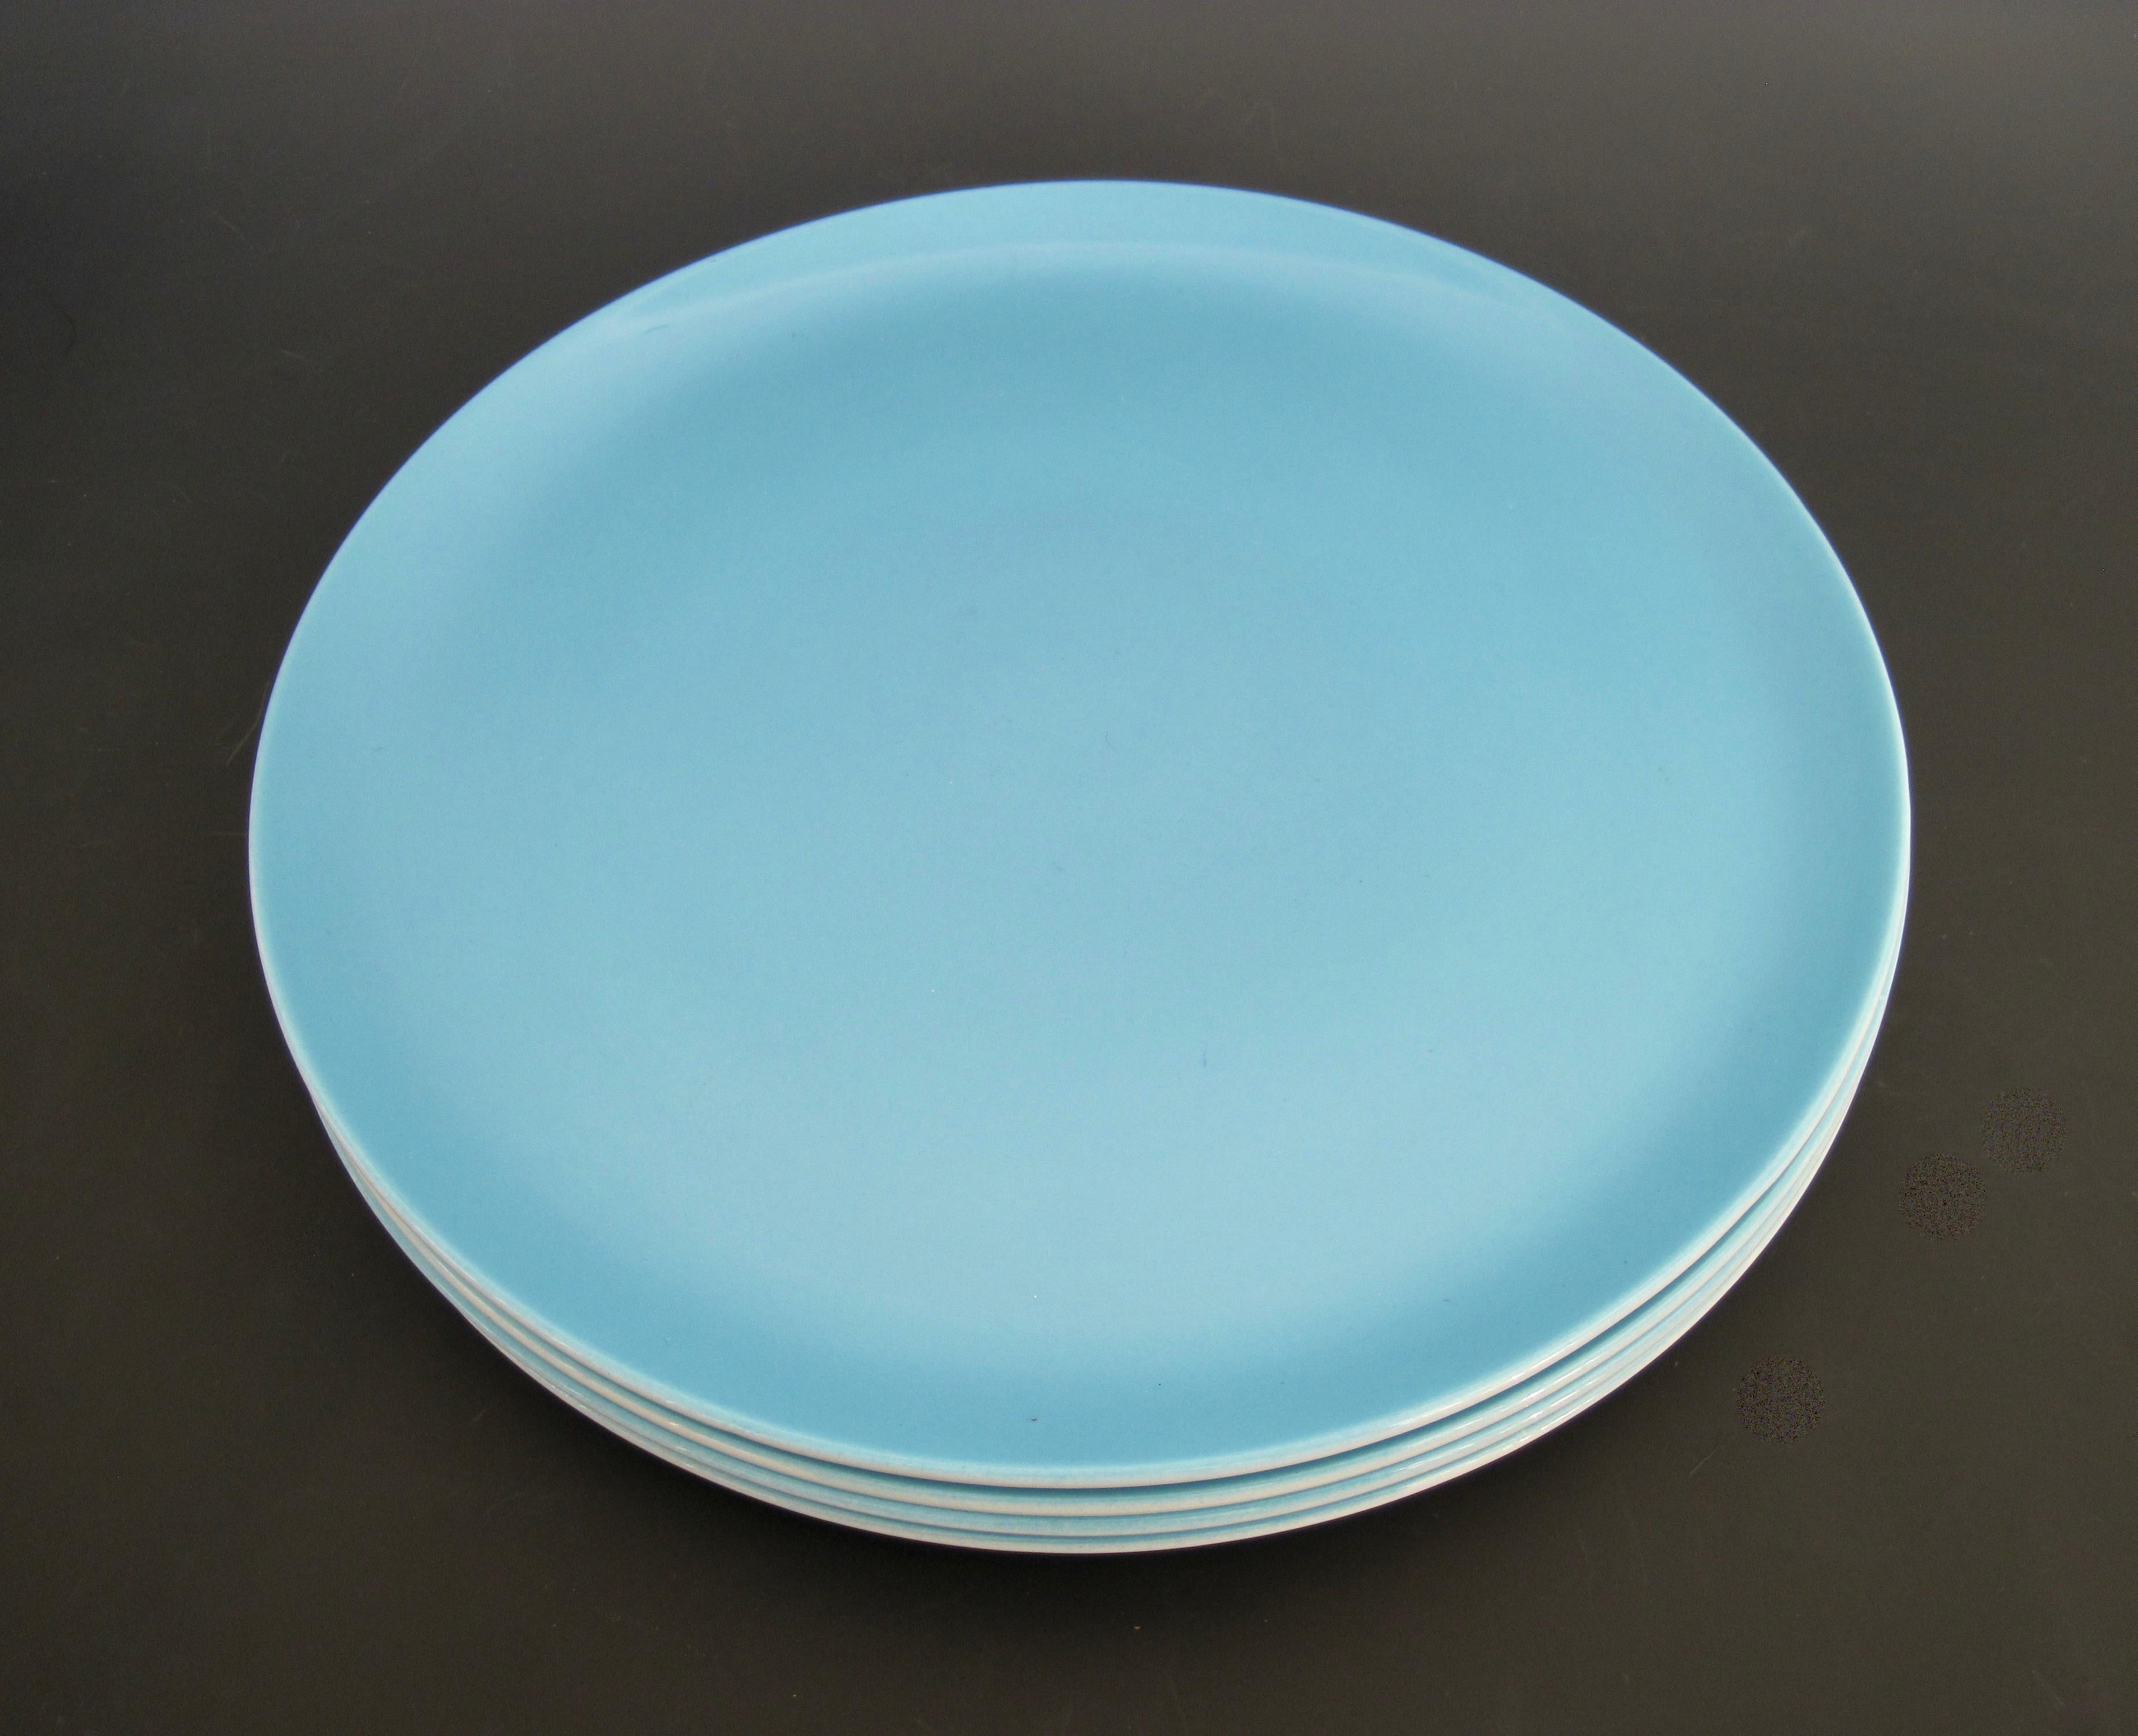 A four piece set of ovenproof ironstone dinner plates designed by Lagardo Tackett for Schmid in 1961. Perfect to add to your collection and the beautiful blue glaze is sure to brighten up any table at breakfast or anytime. Wonderful condition made